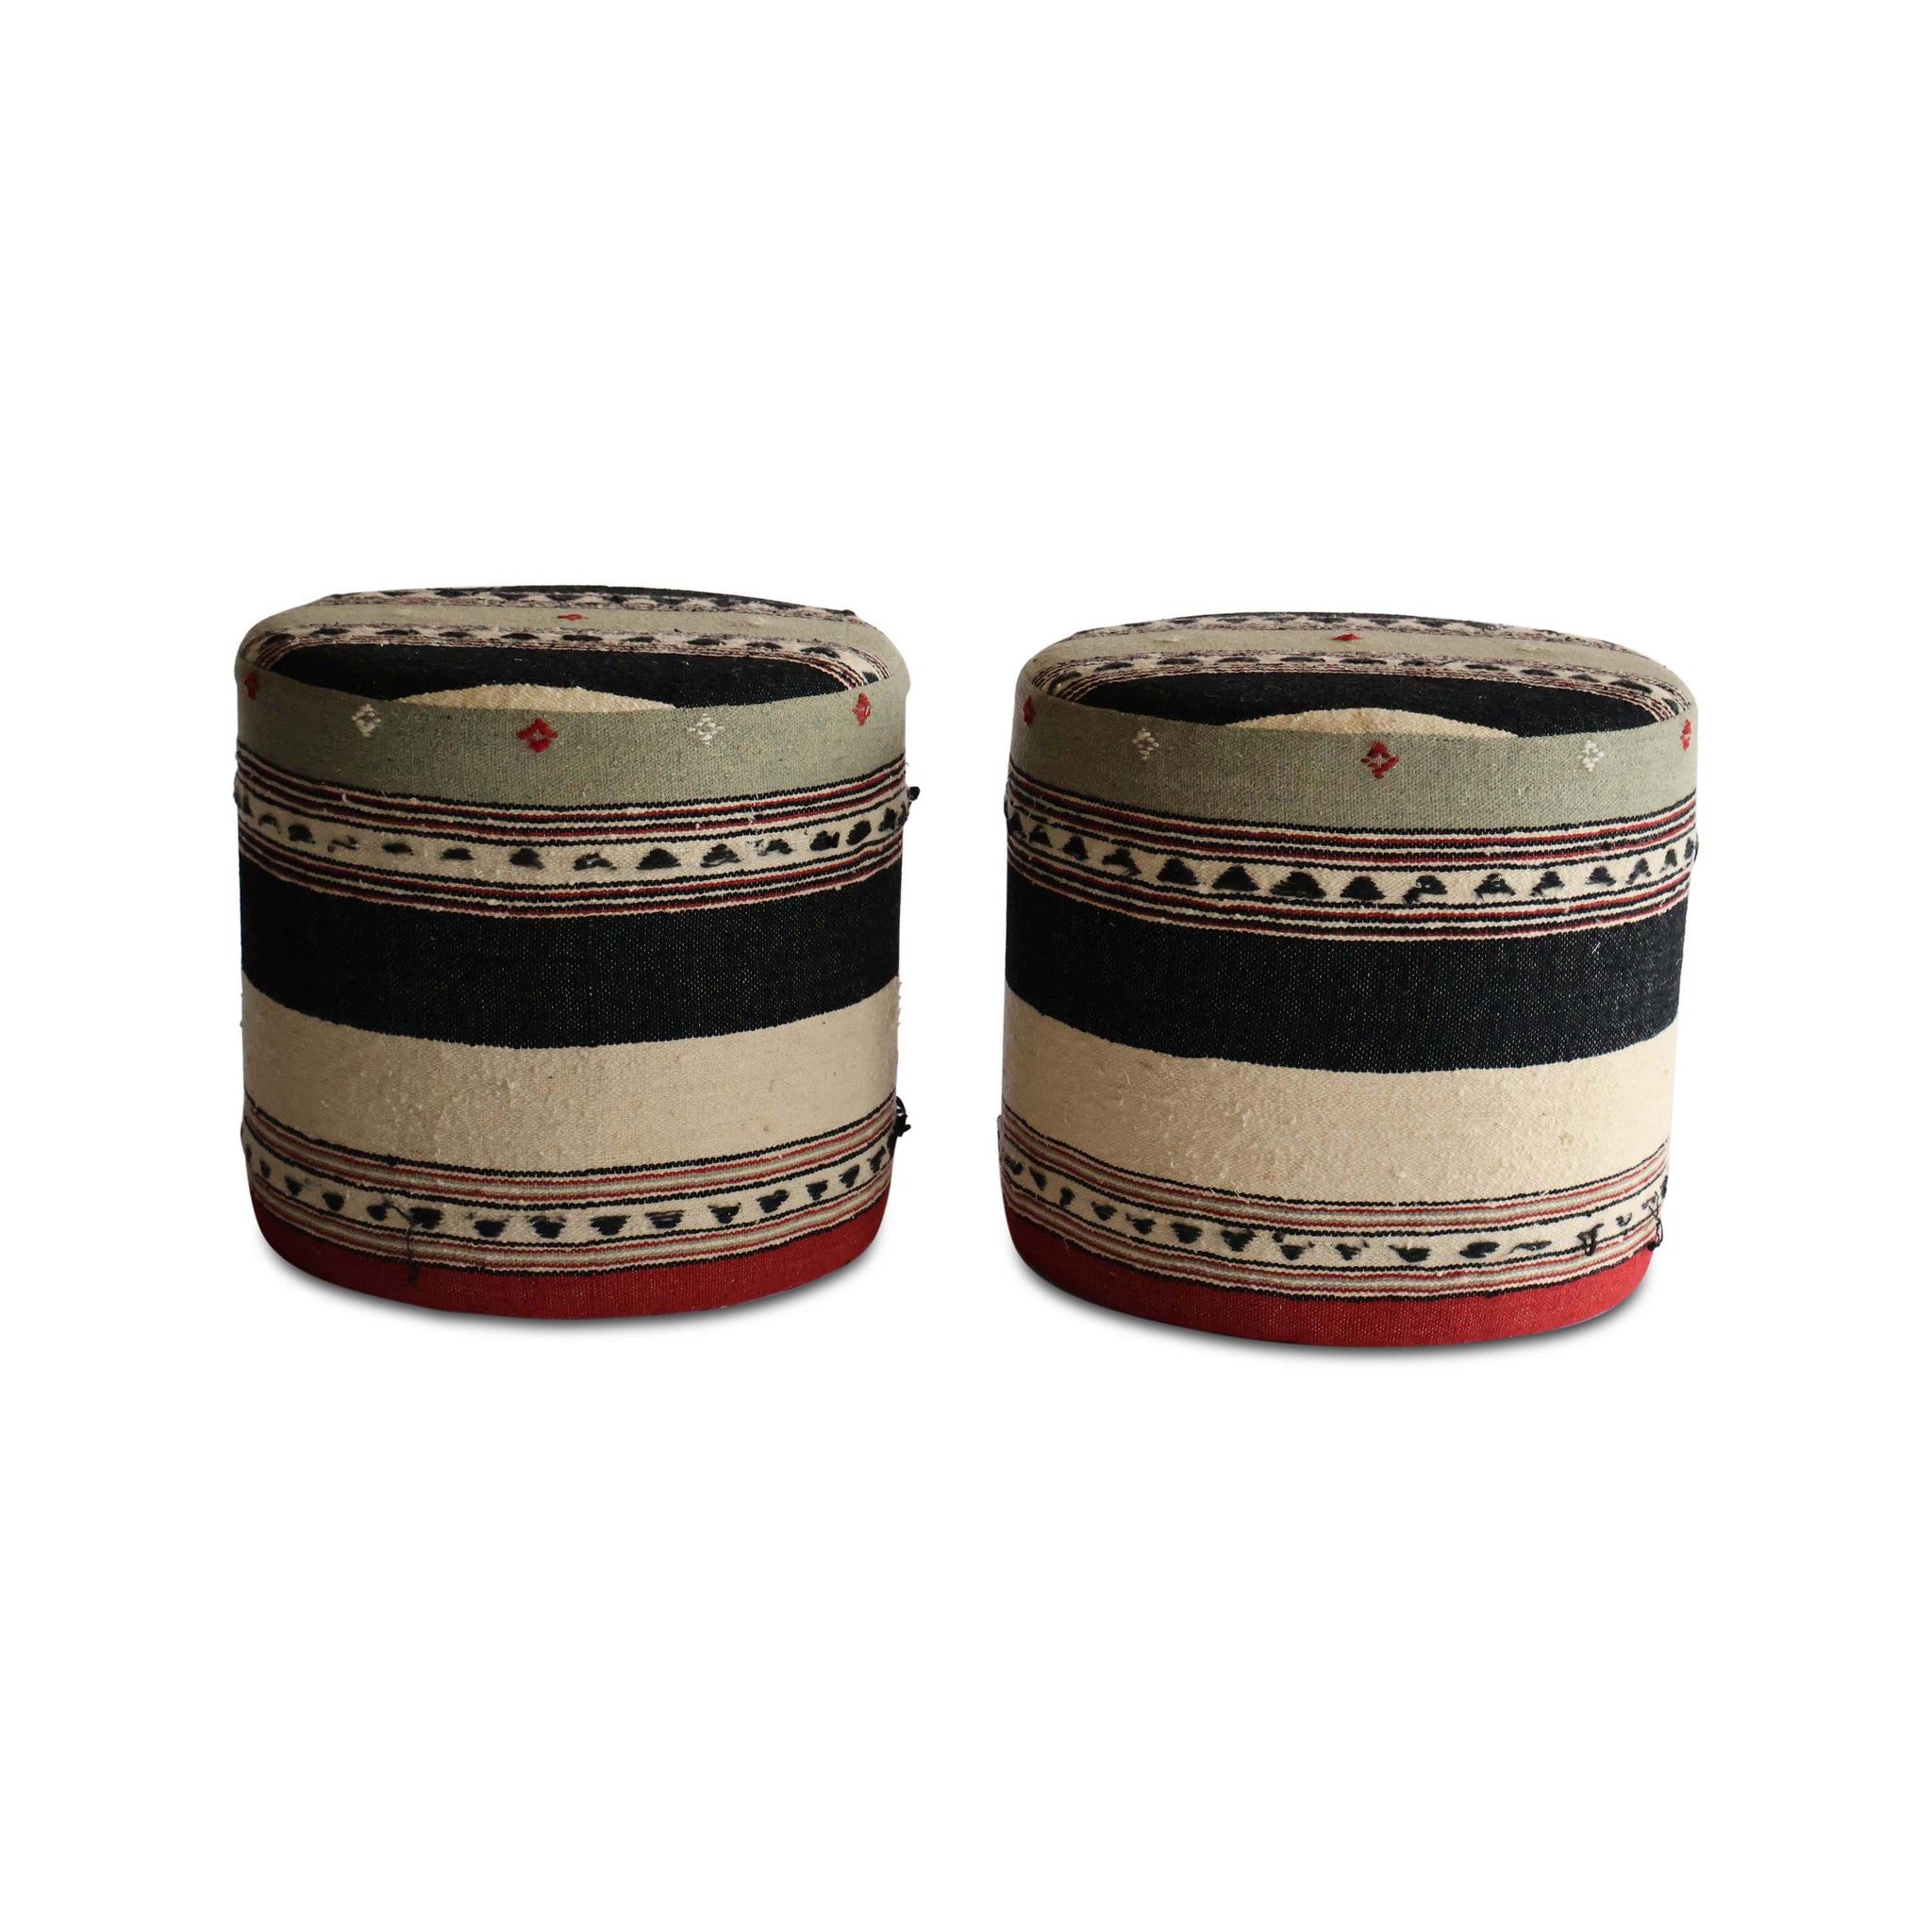 Pair of Poufs in Moroccan Textile